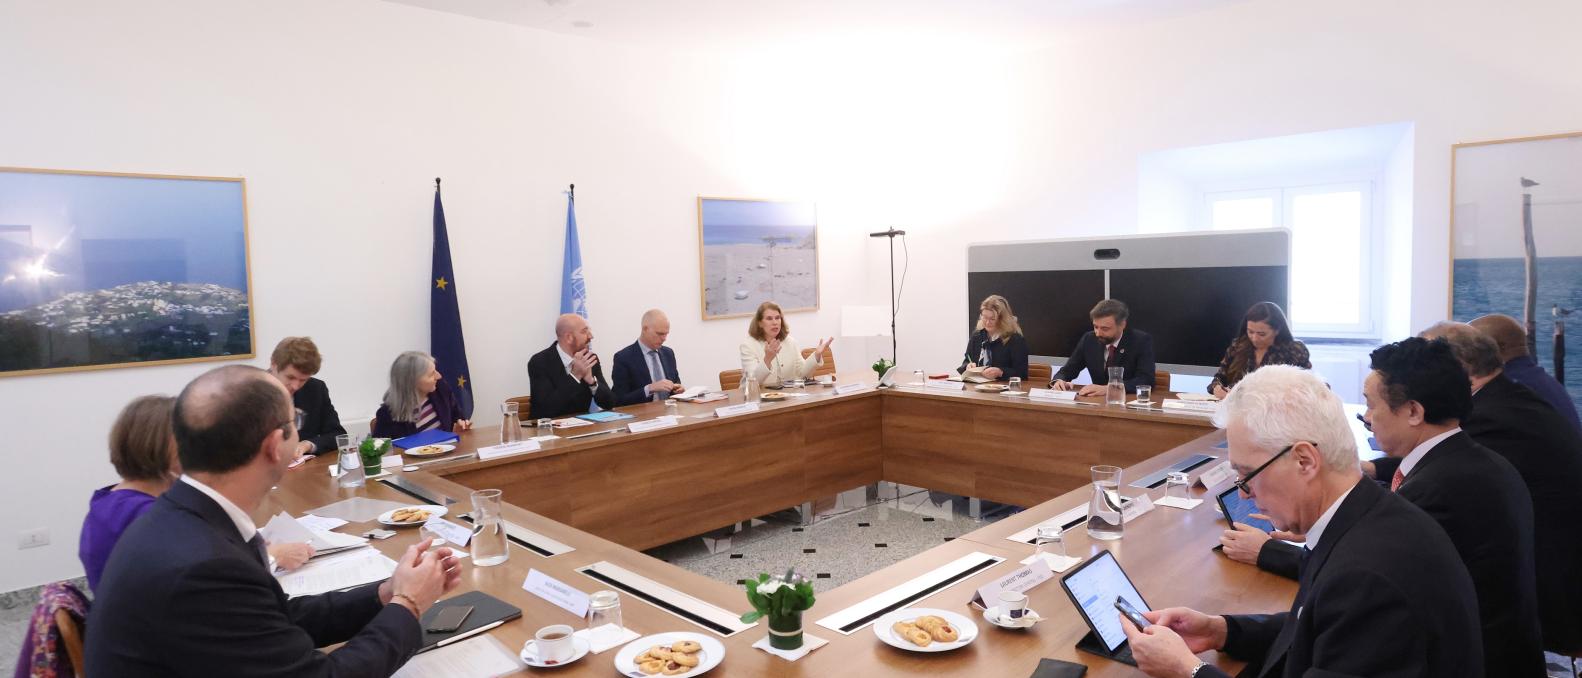 represwentatives of the UN, President of the EU Council and EU Delegation staff at the table